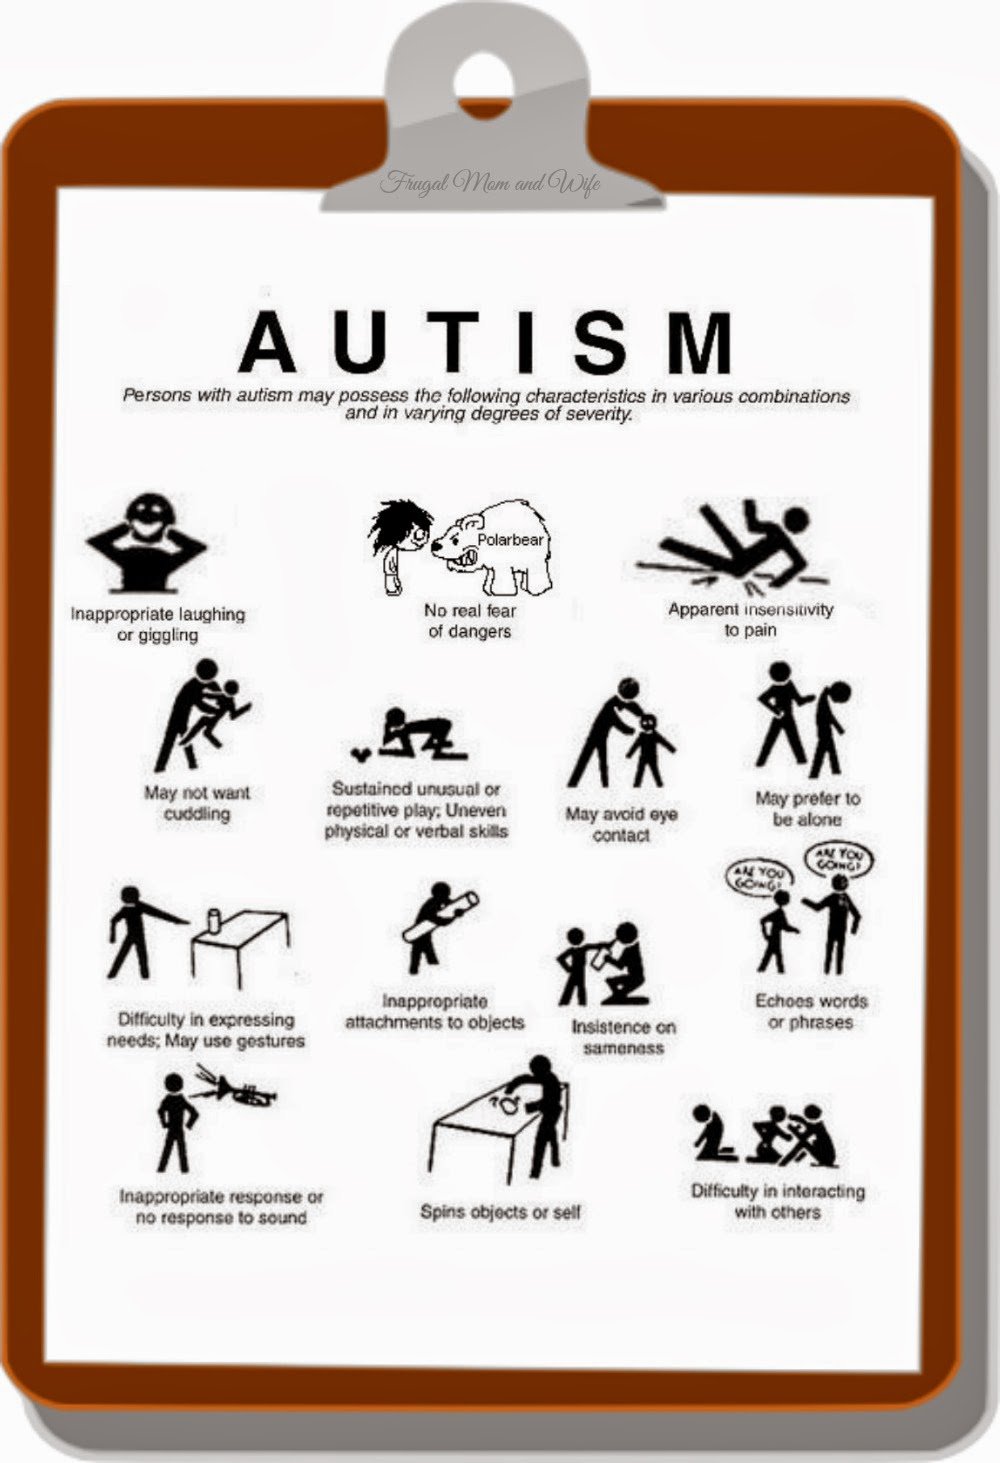 Frugal Mom and Wife: Finding Autism: Signs To Look For?